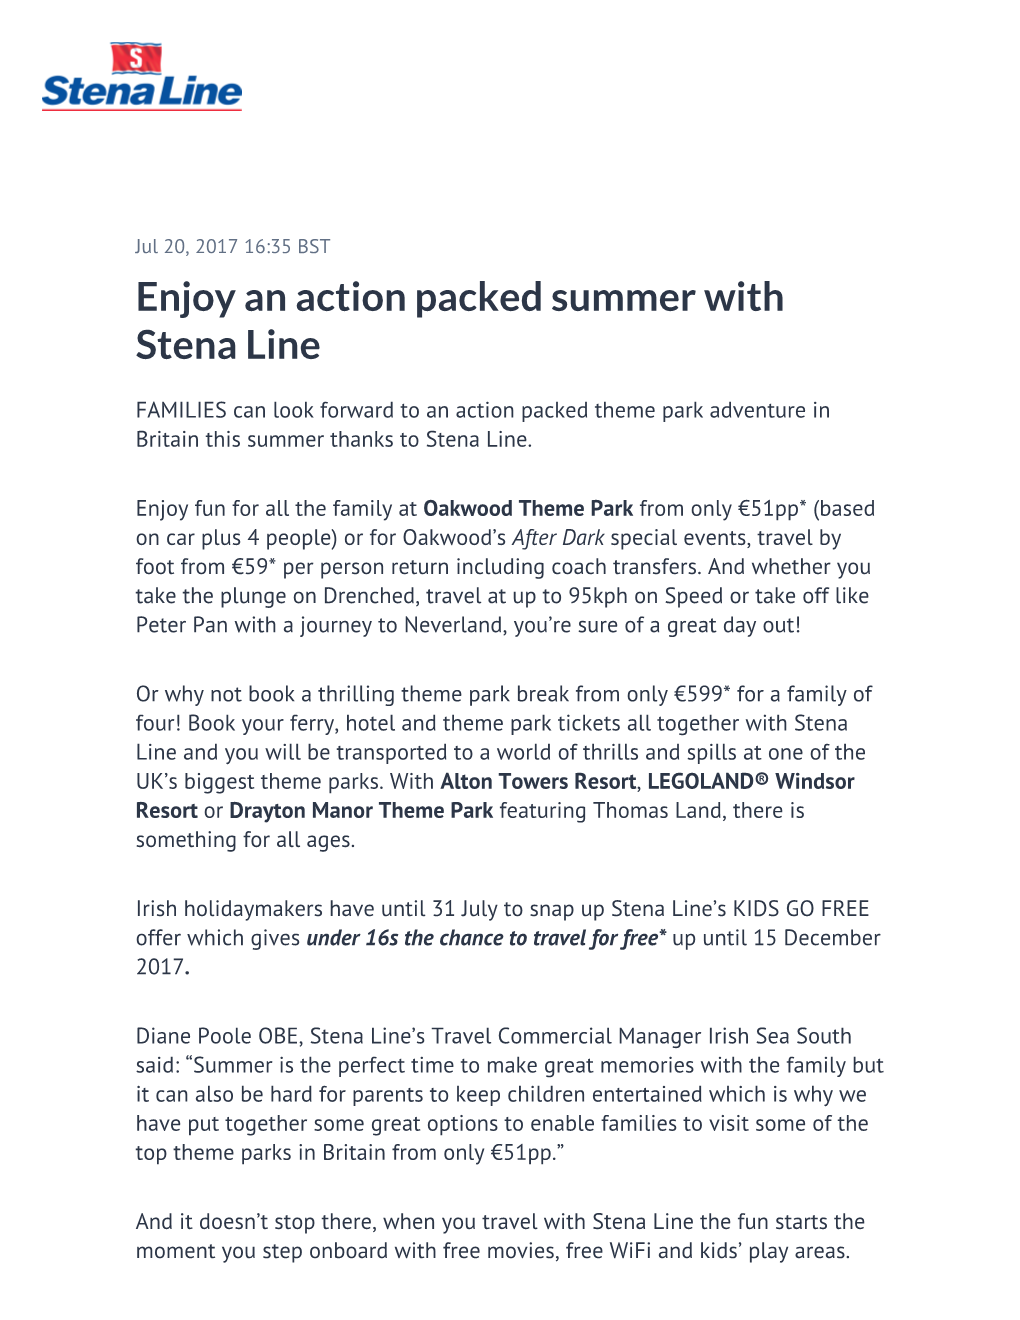 Enjoy an Action Packed Summer with Stena Line